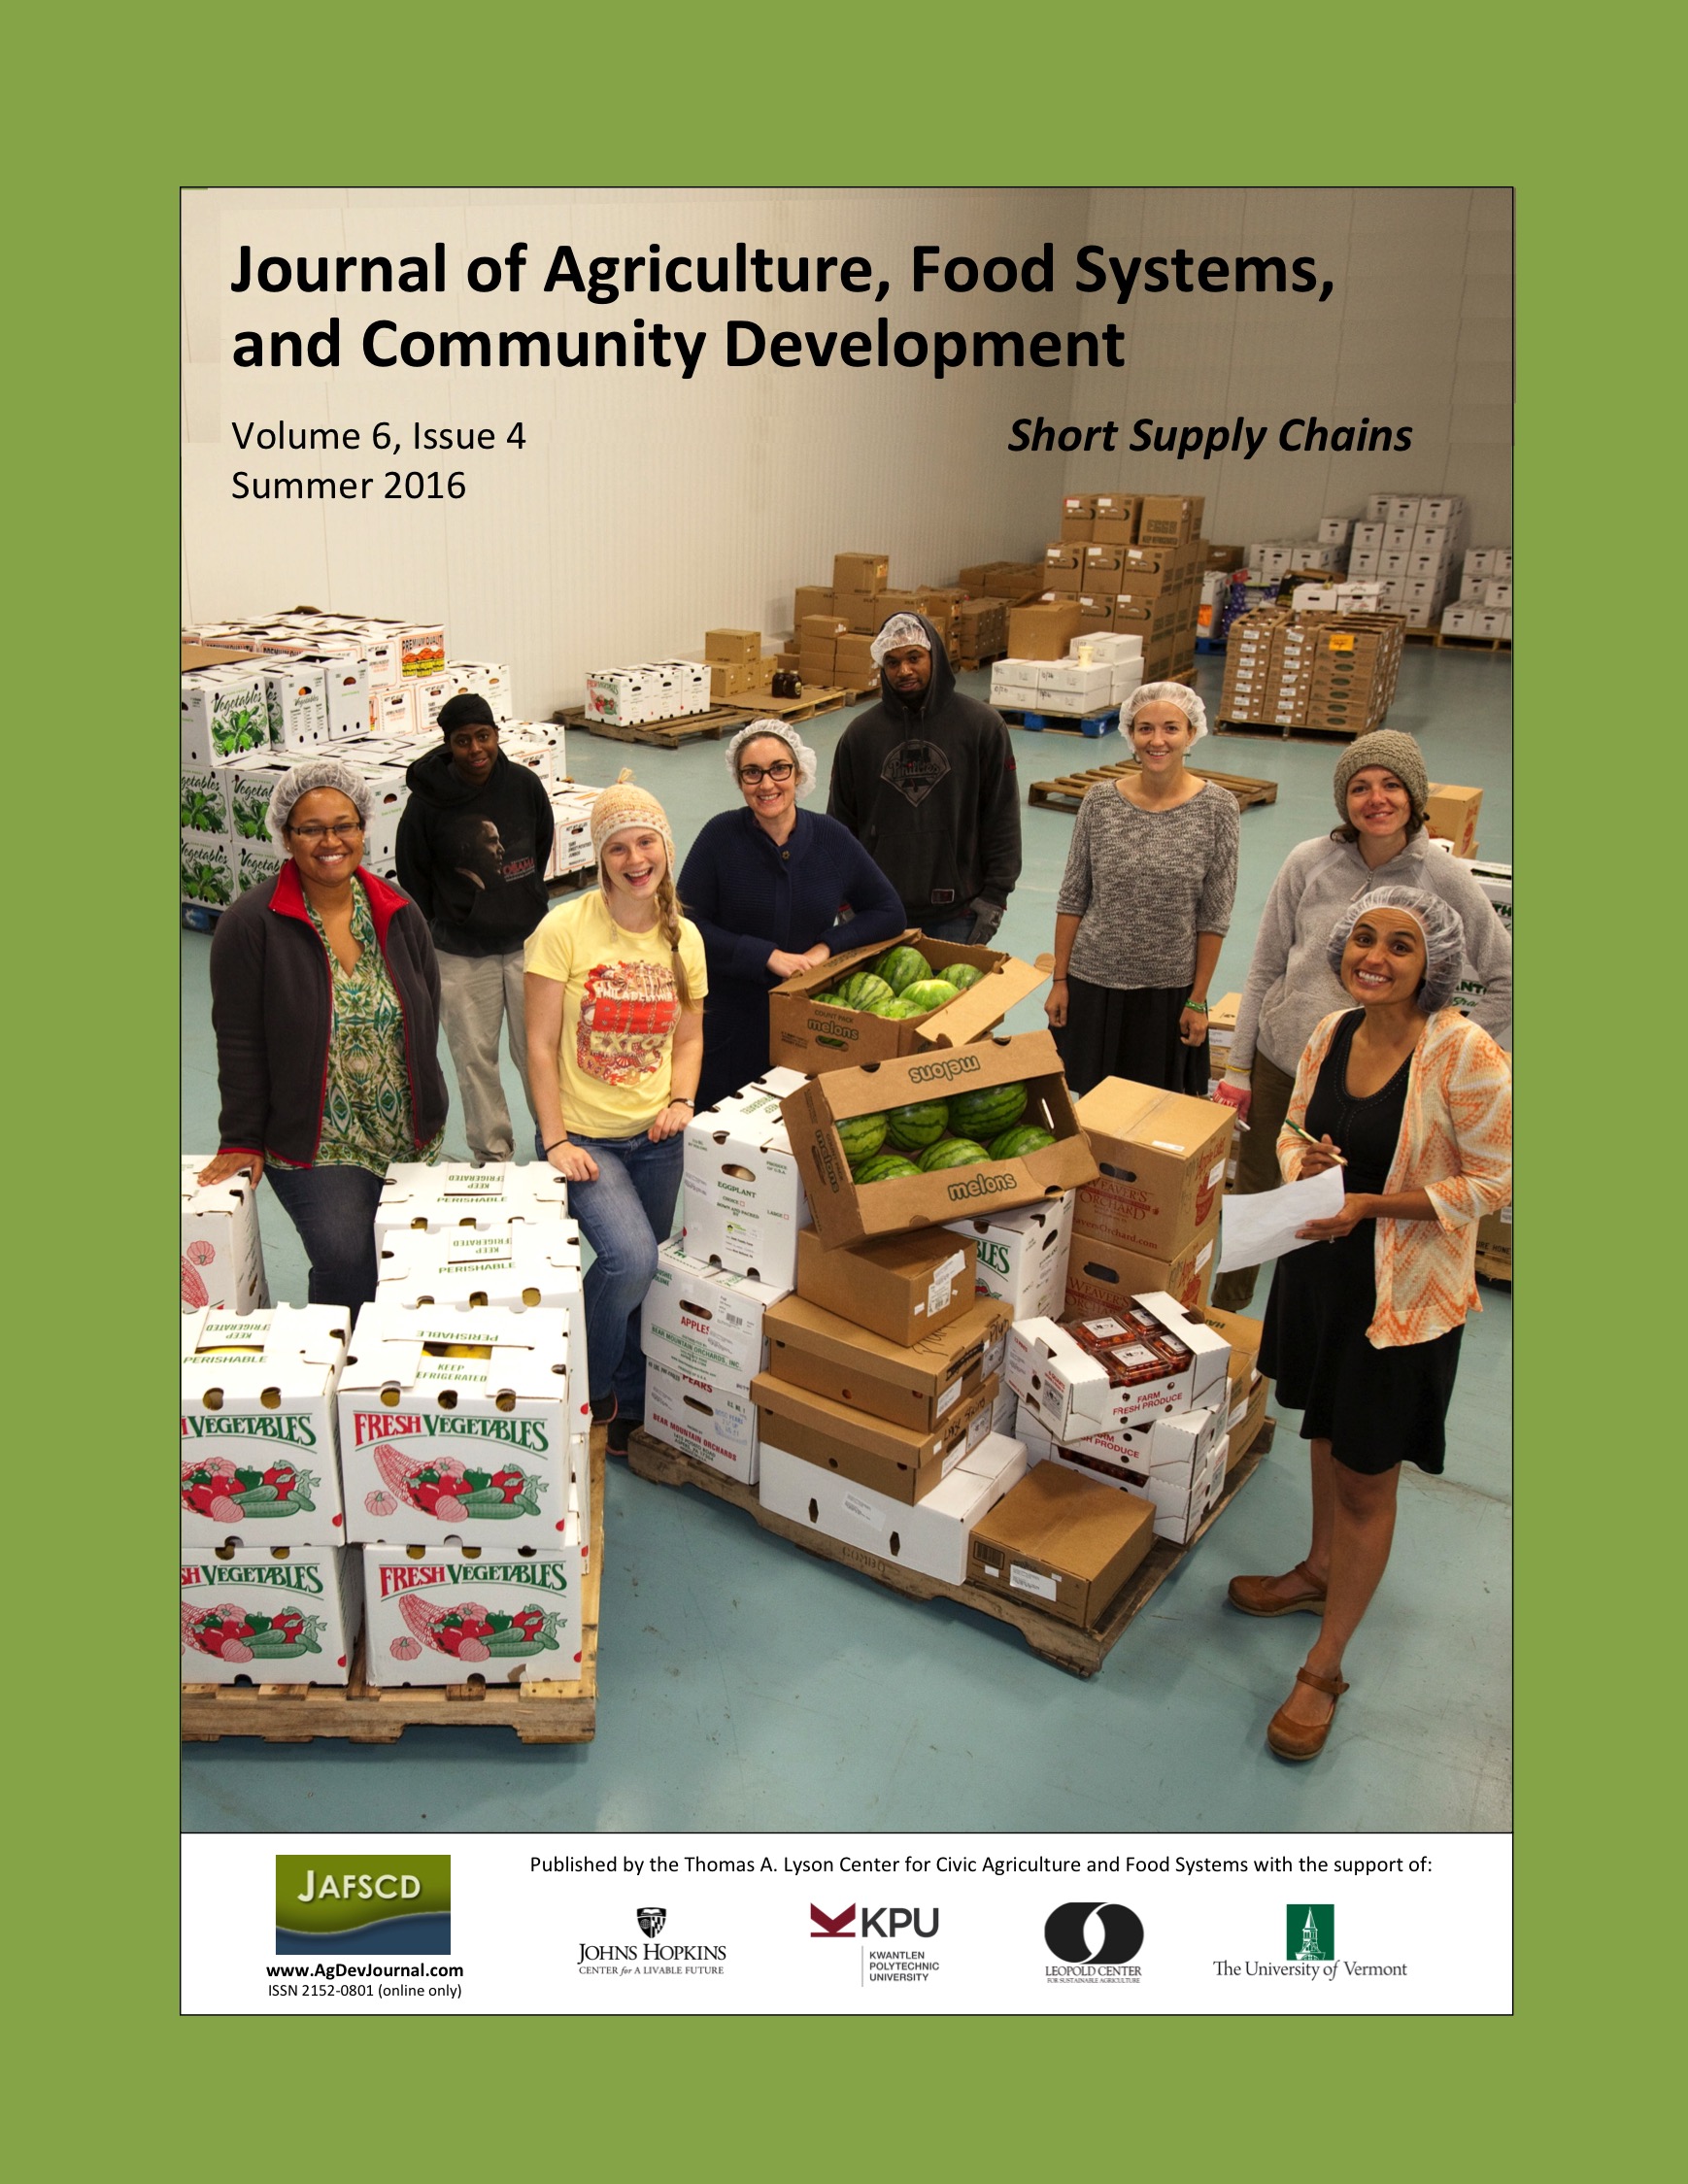 Cover of volume 6, issue 4 (summer 2016) with staff of The Common Market.